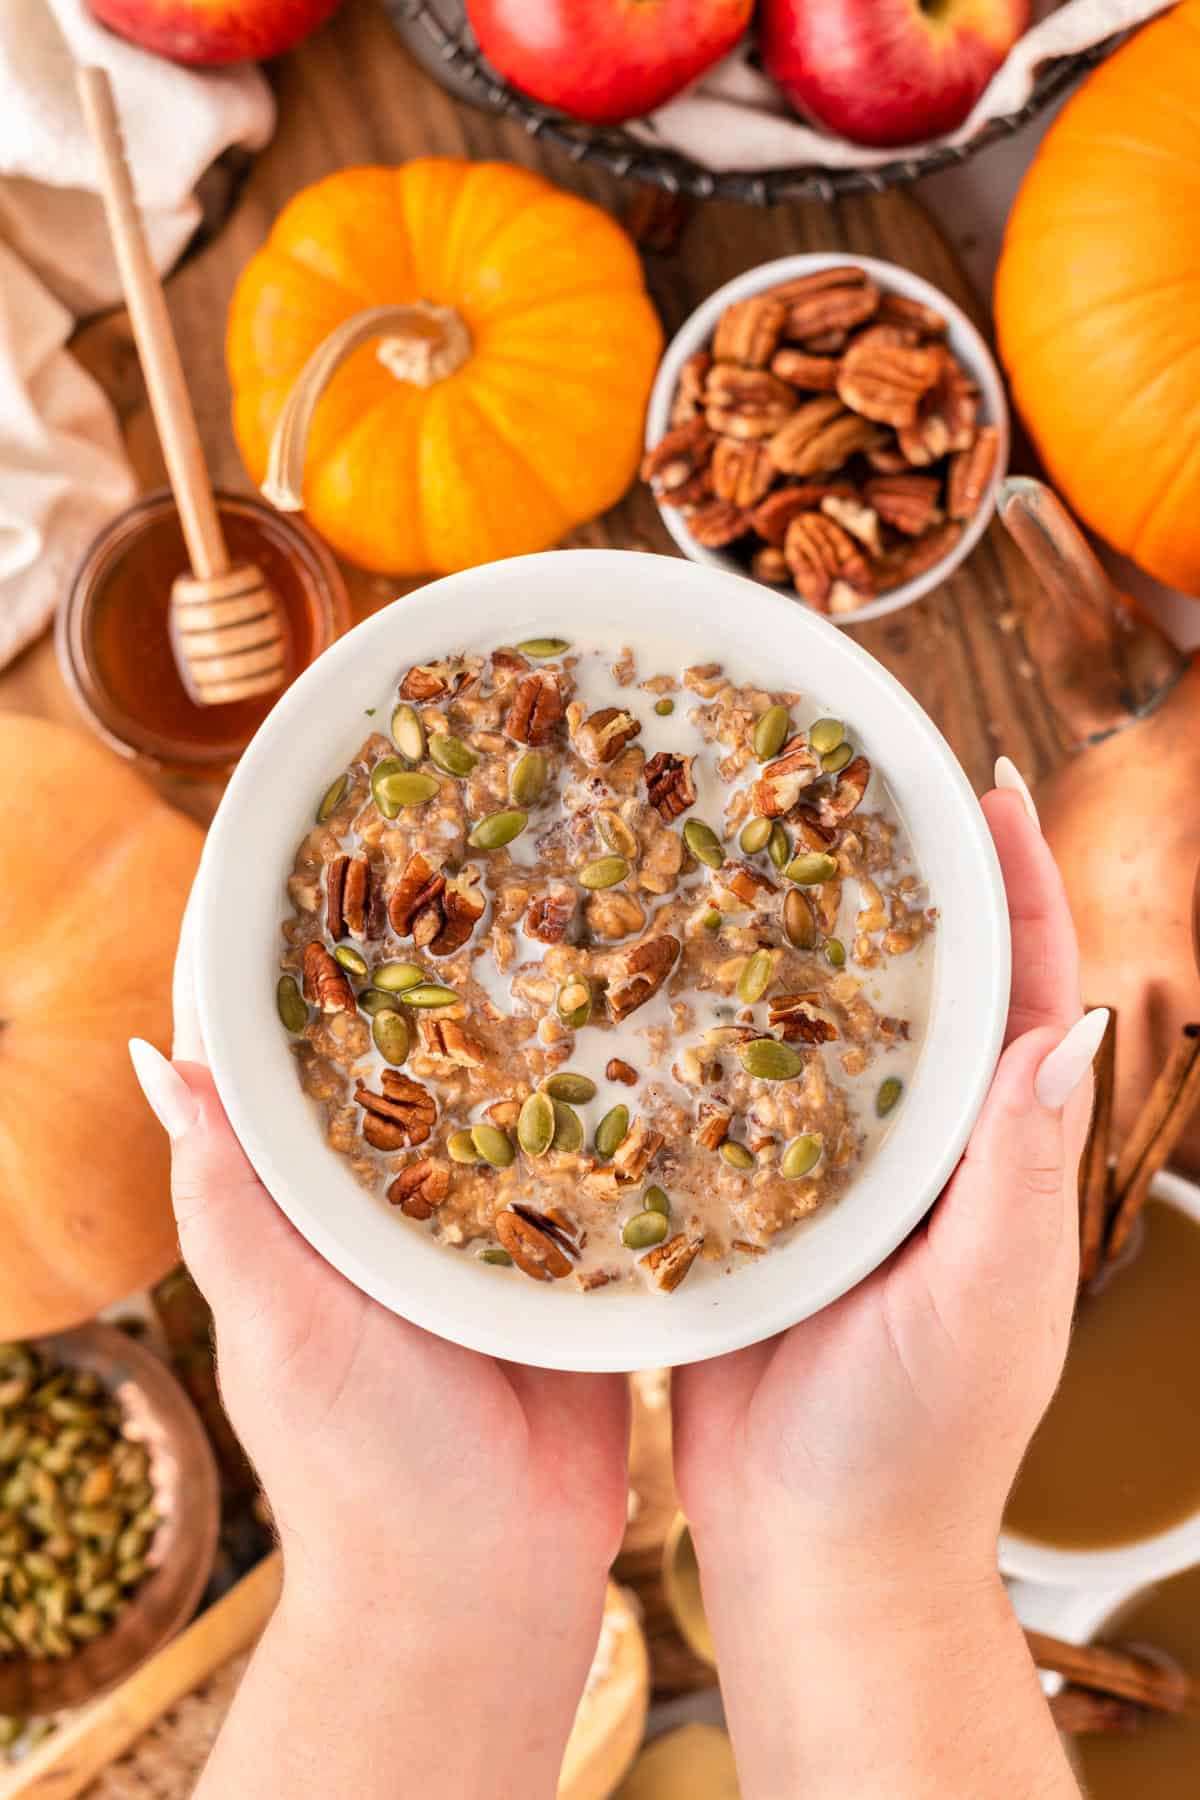 A photo of hands holding up a bowl of pumpkin oatmeal with nuts and milk.